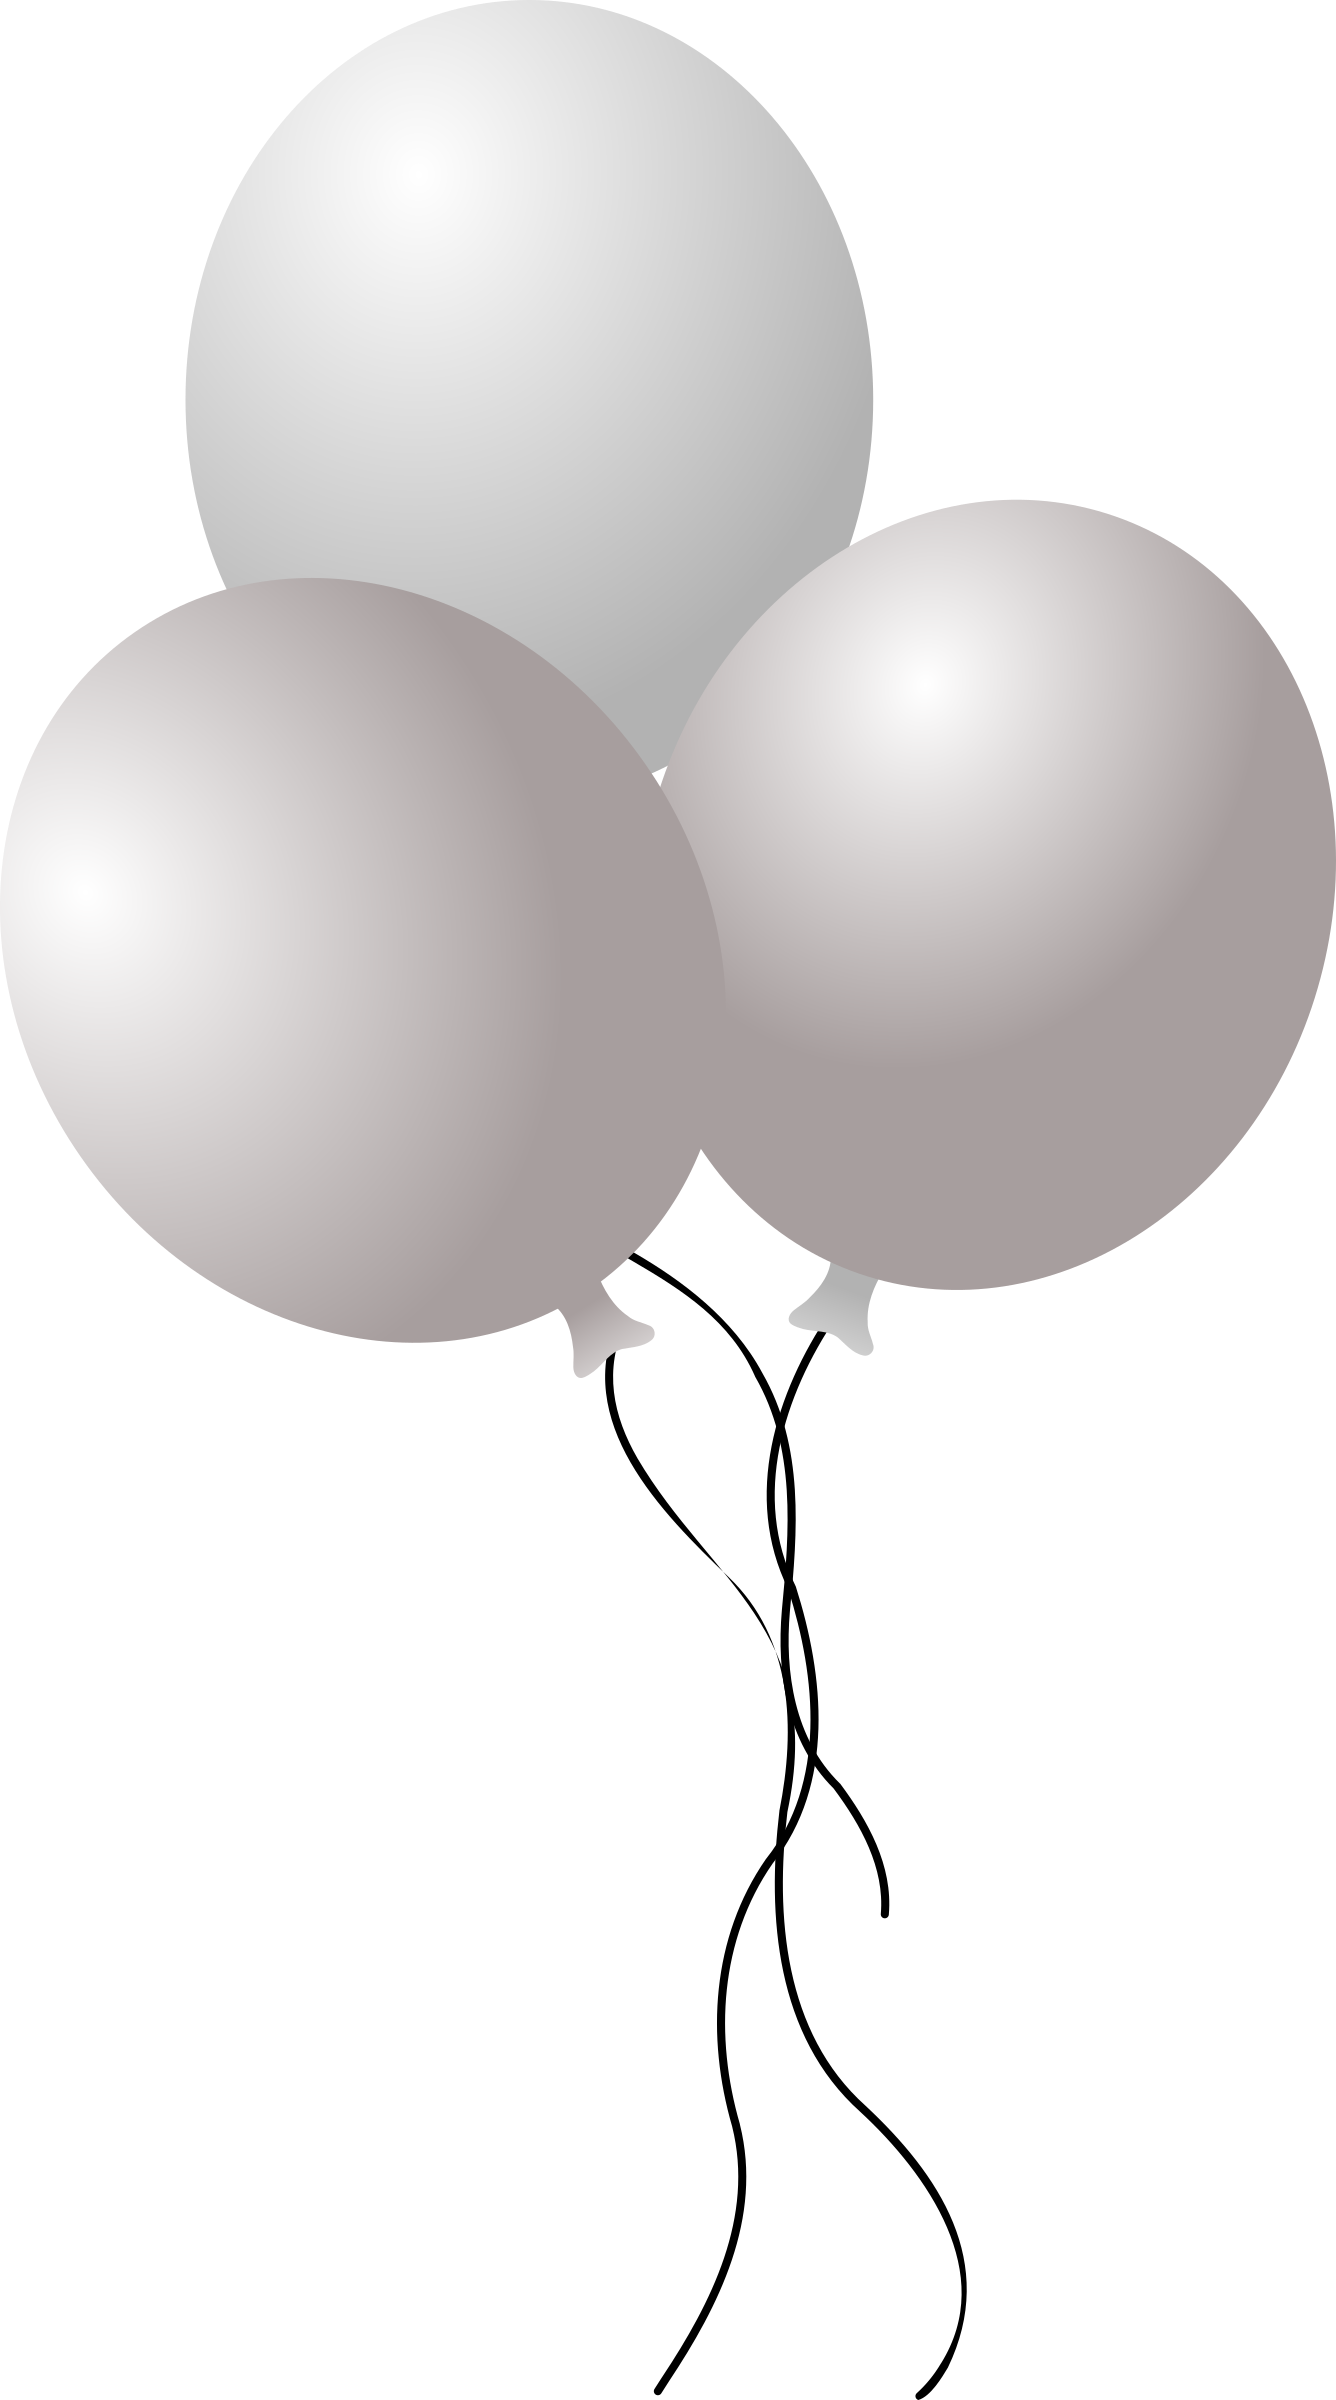 A Group Of White Balloons